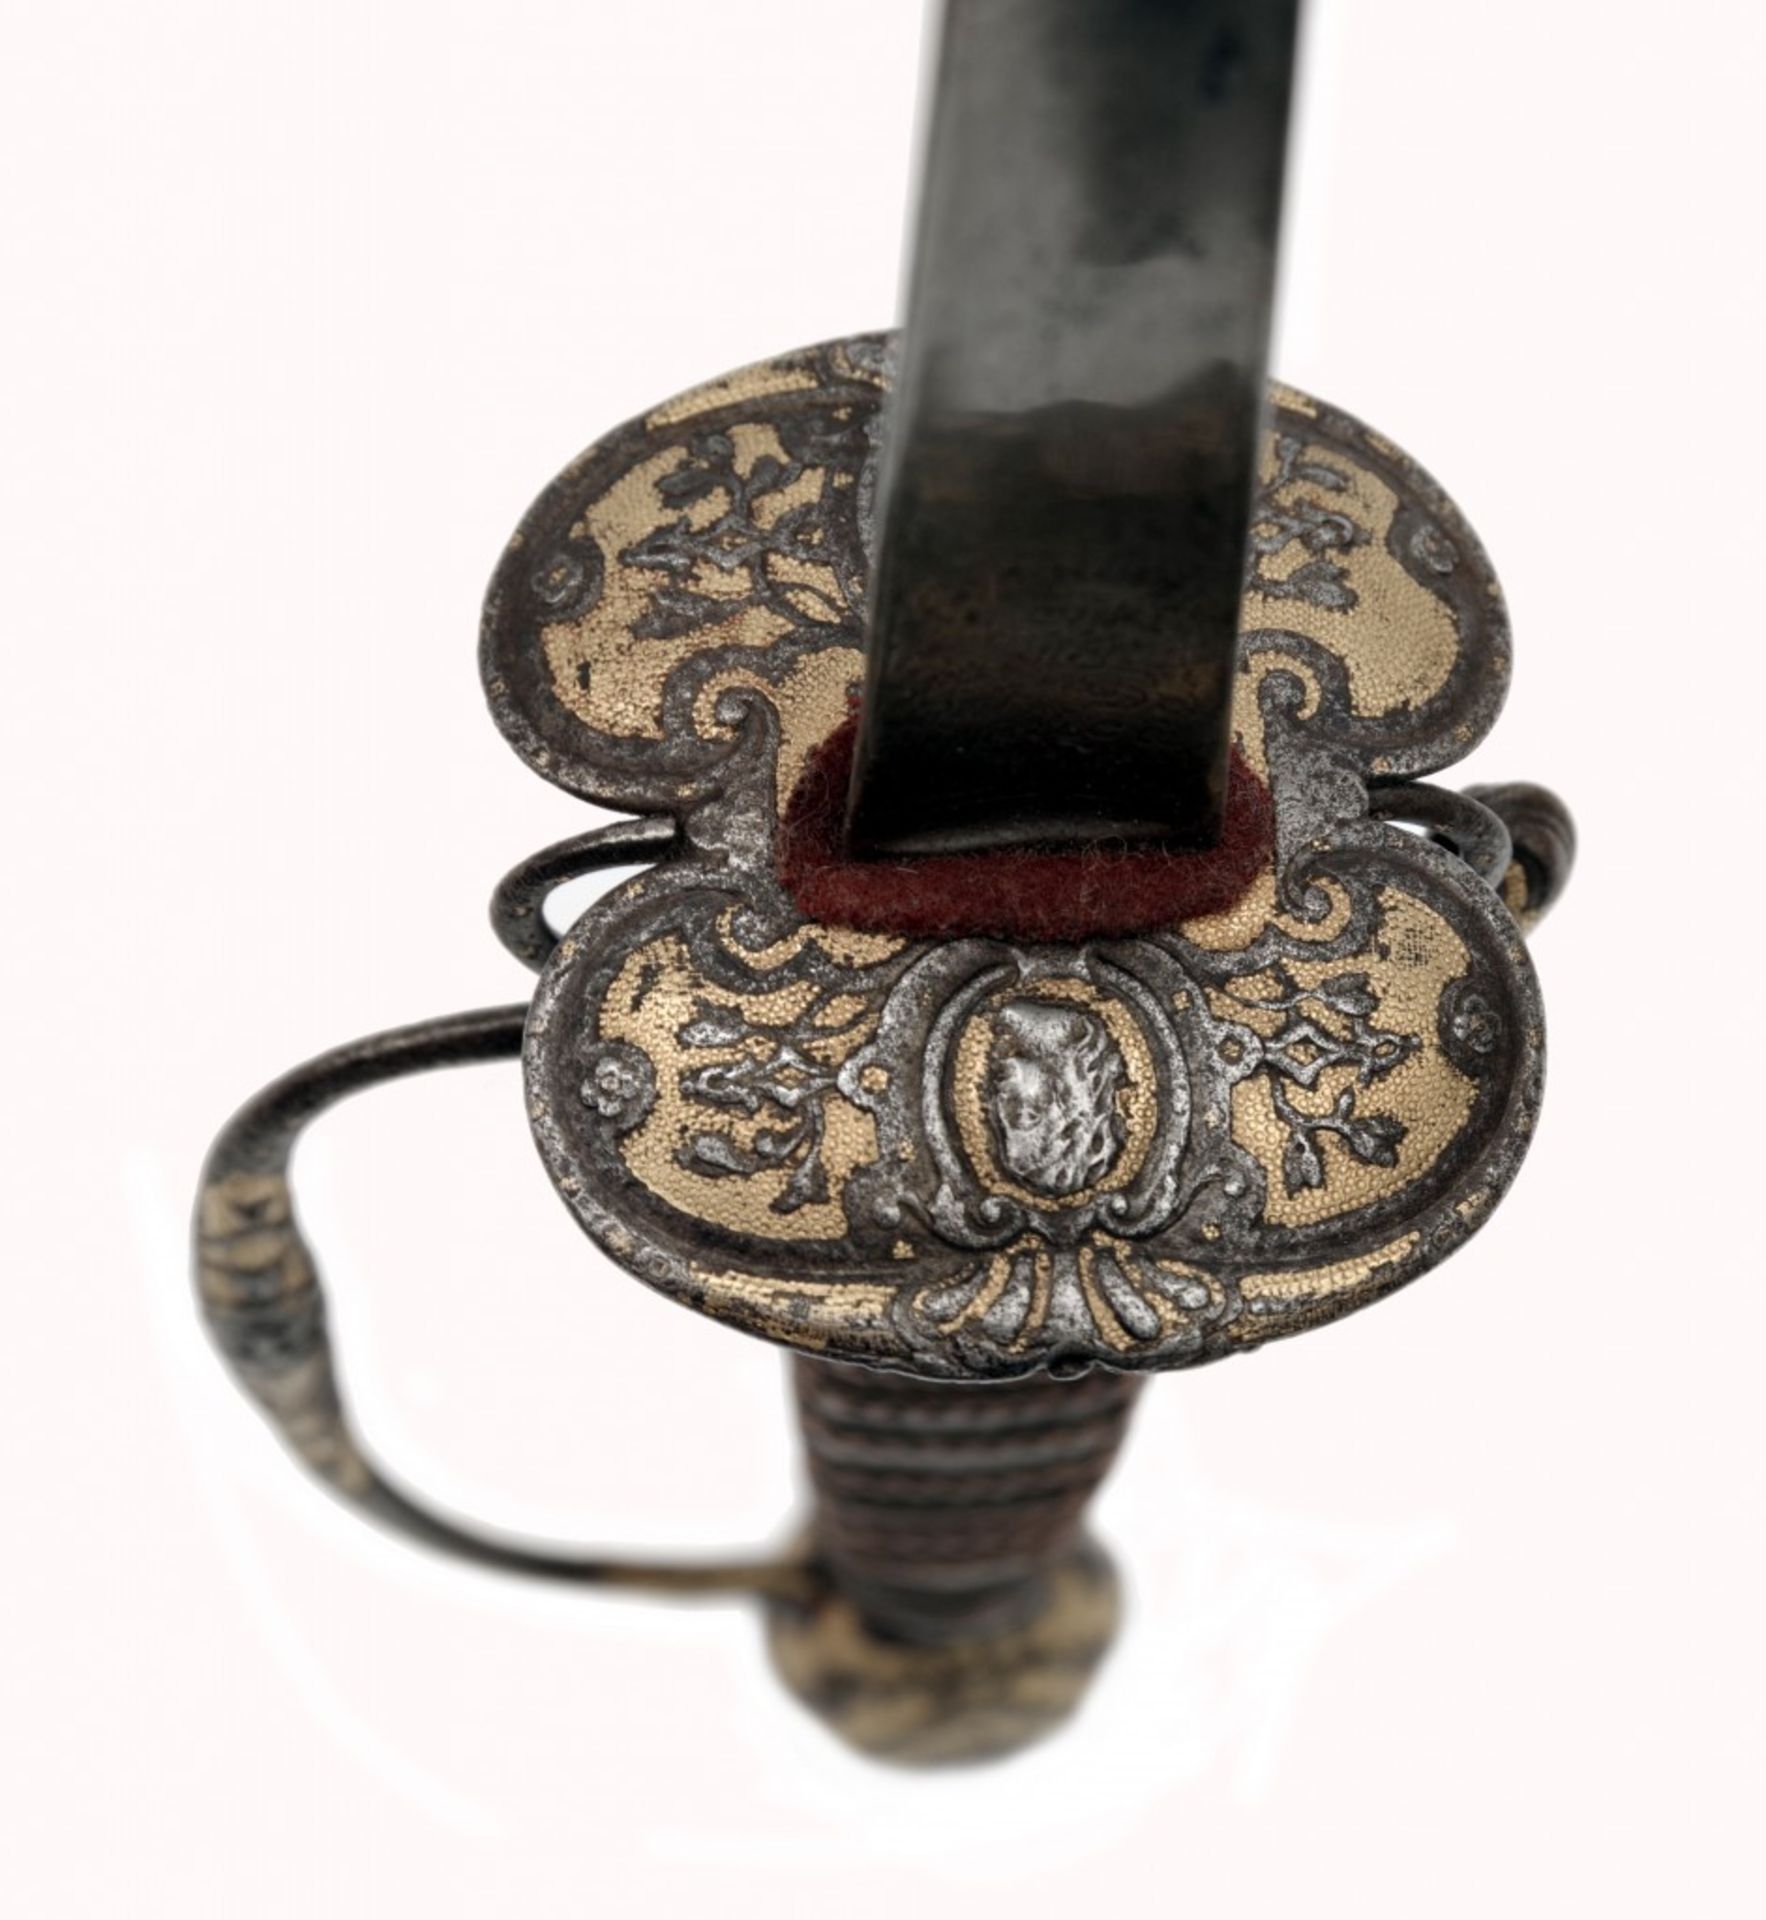 A French Gilt Small-sword with Chiselled Hilt by Jean Louis Guyon the Elder - Image 4 of 11